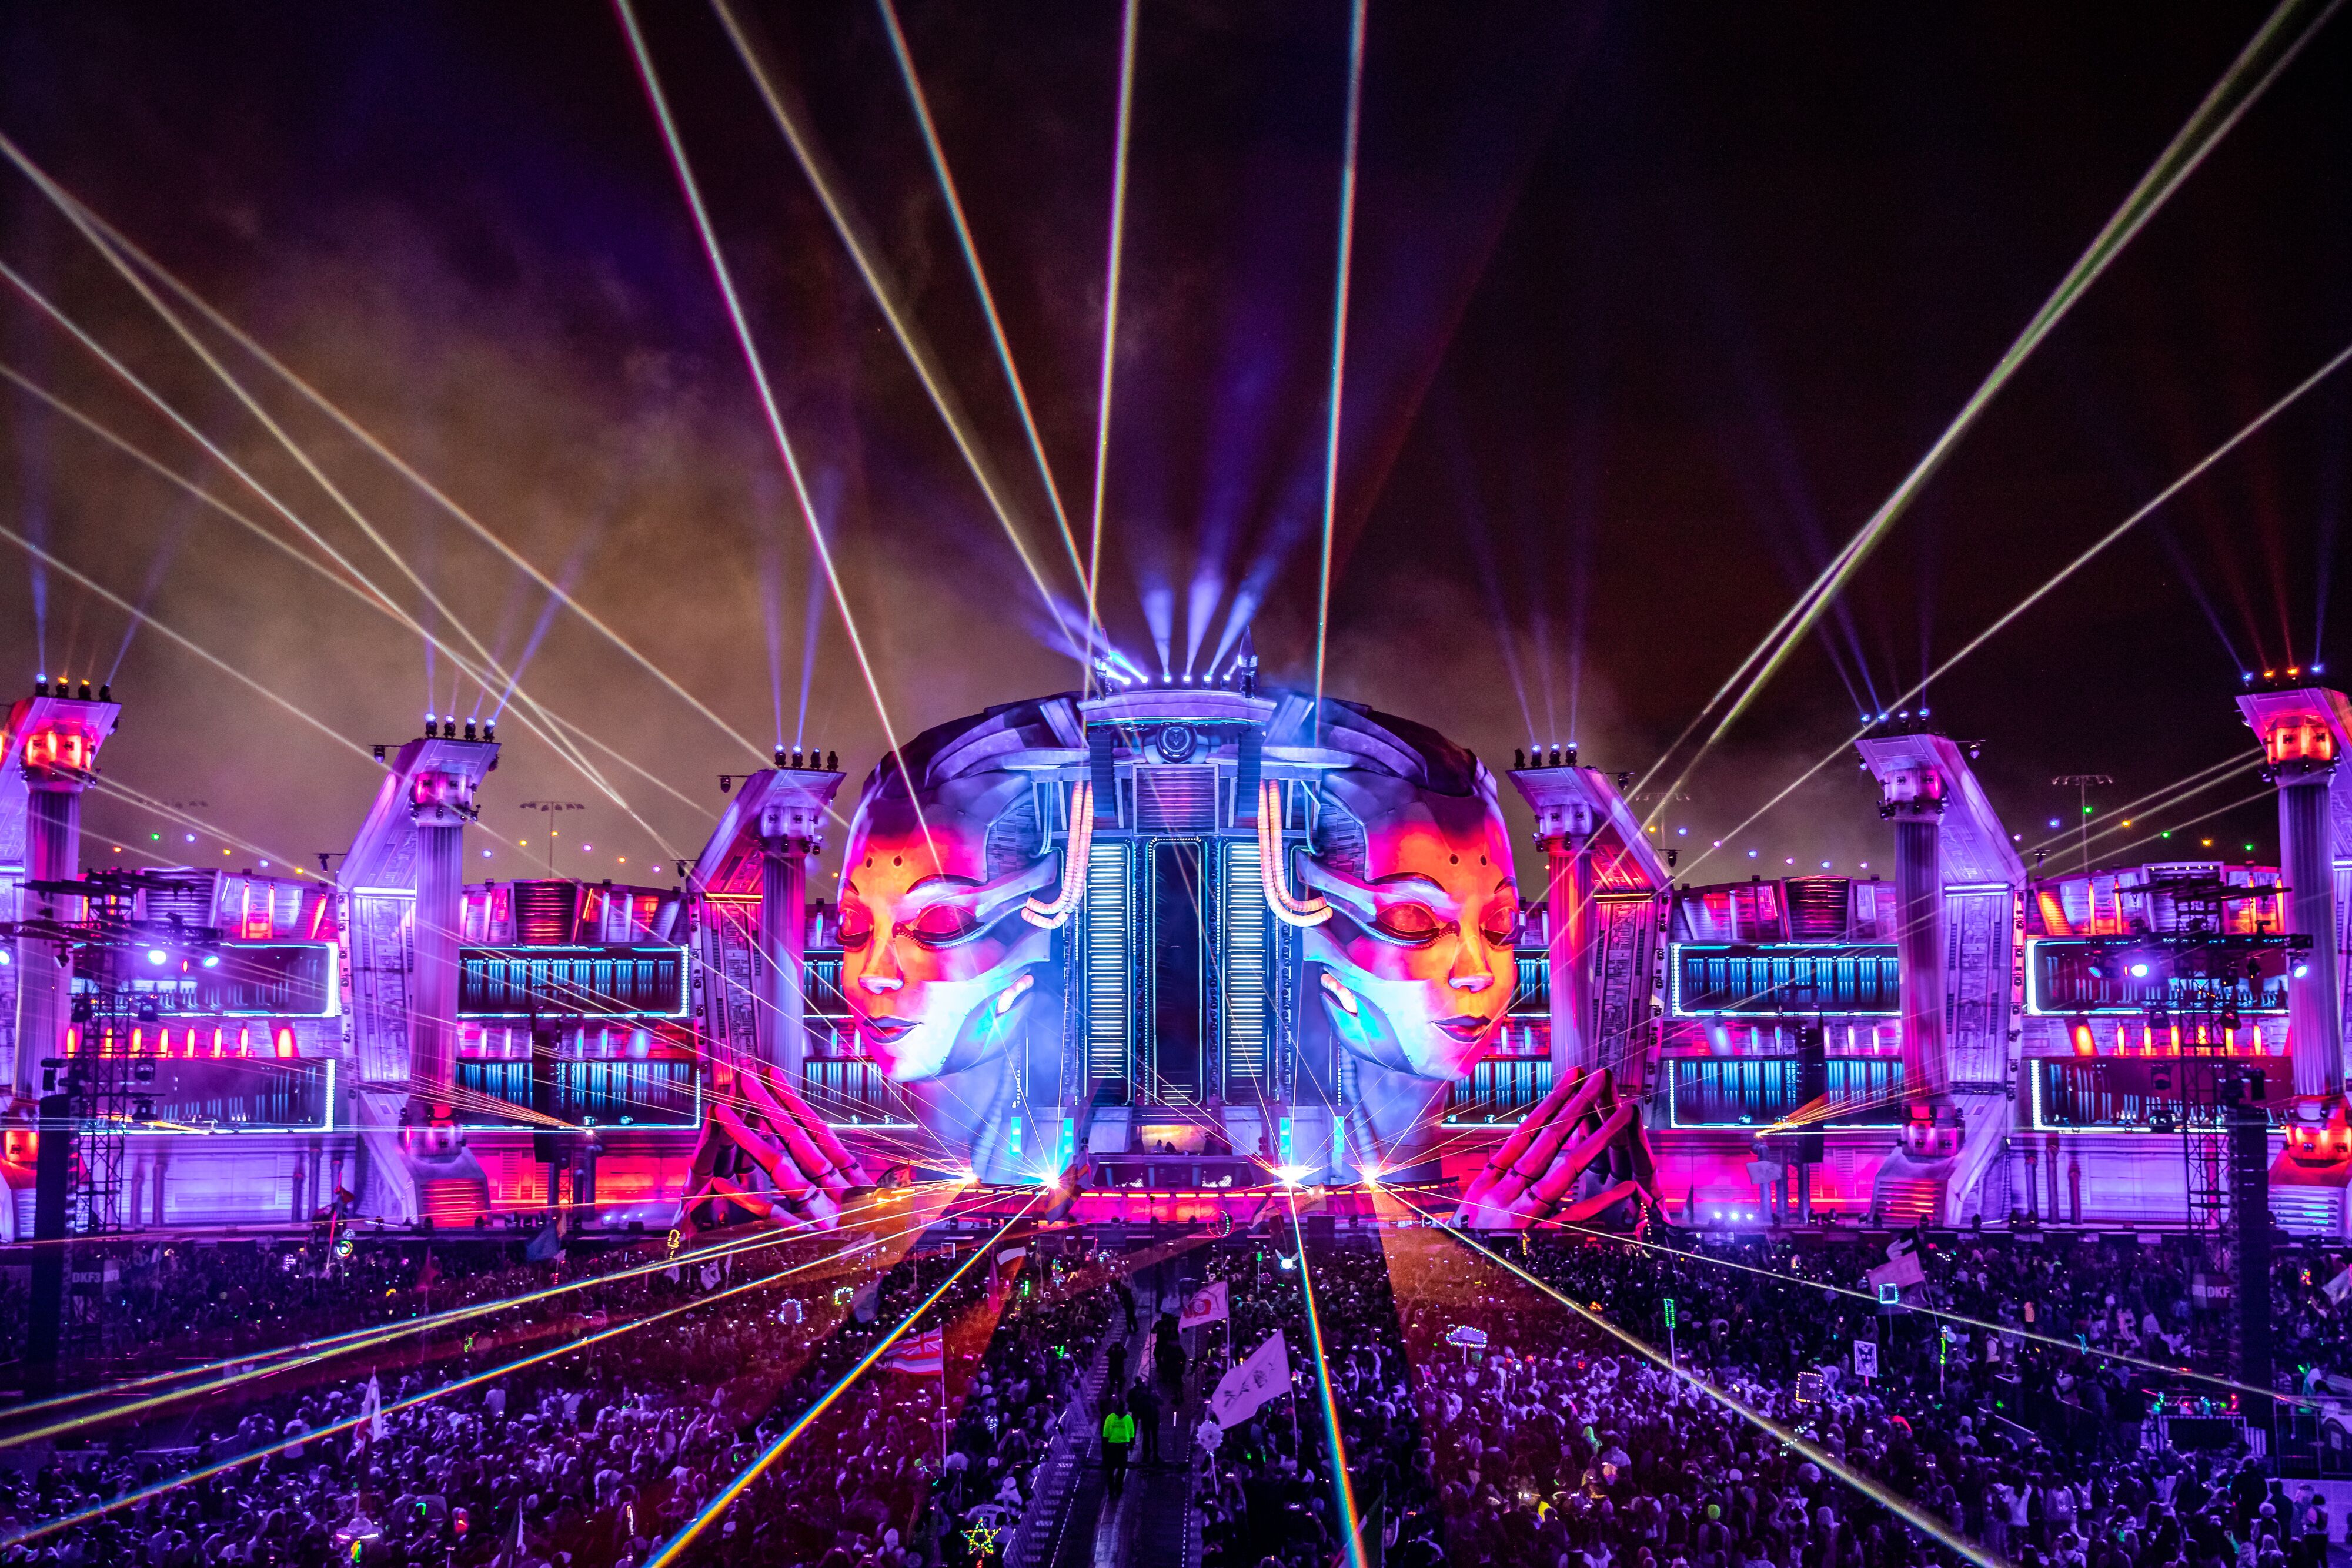 Man arrested after driving over girlfriend for attending EDC Las Vegas